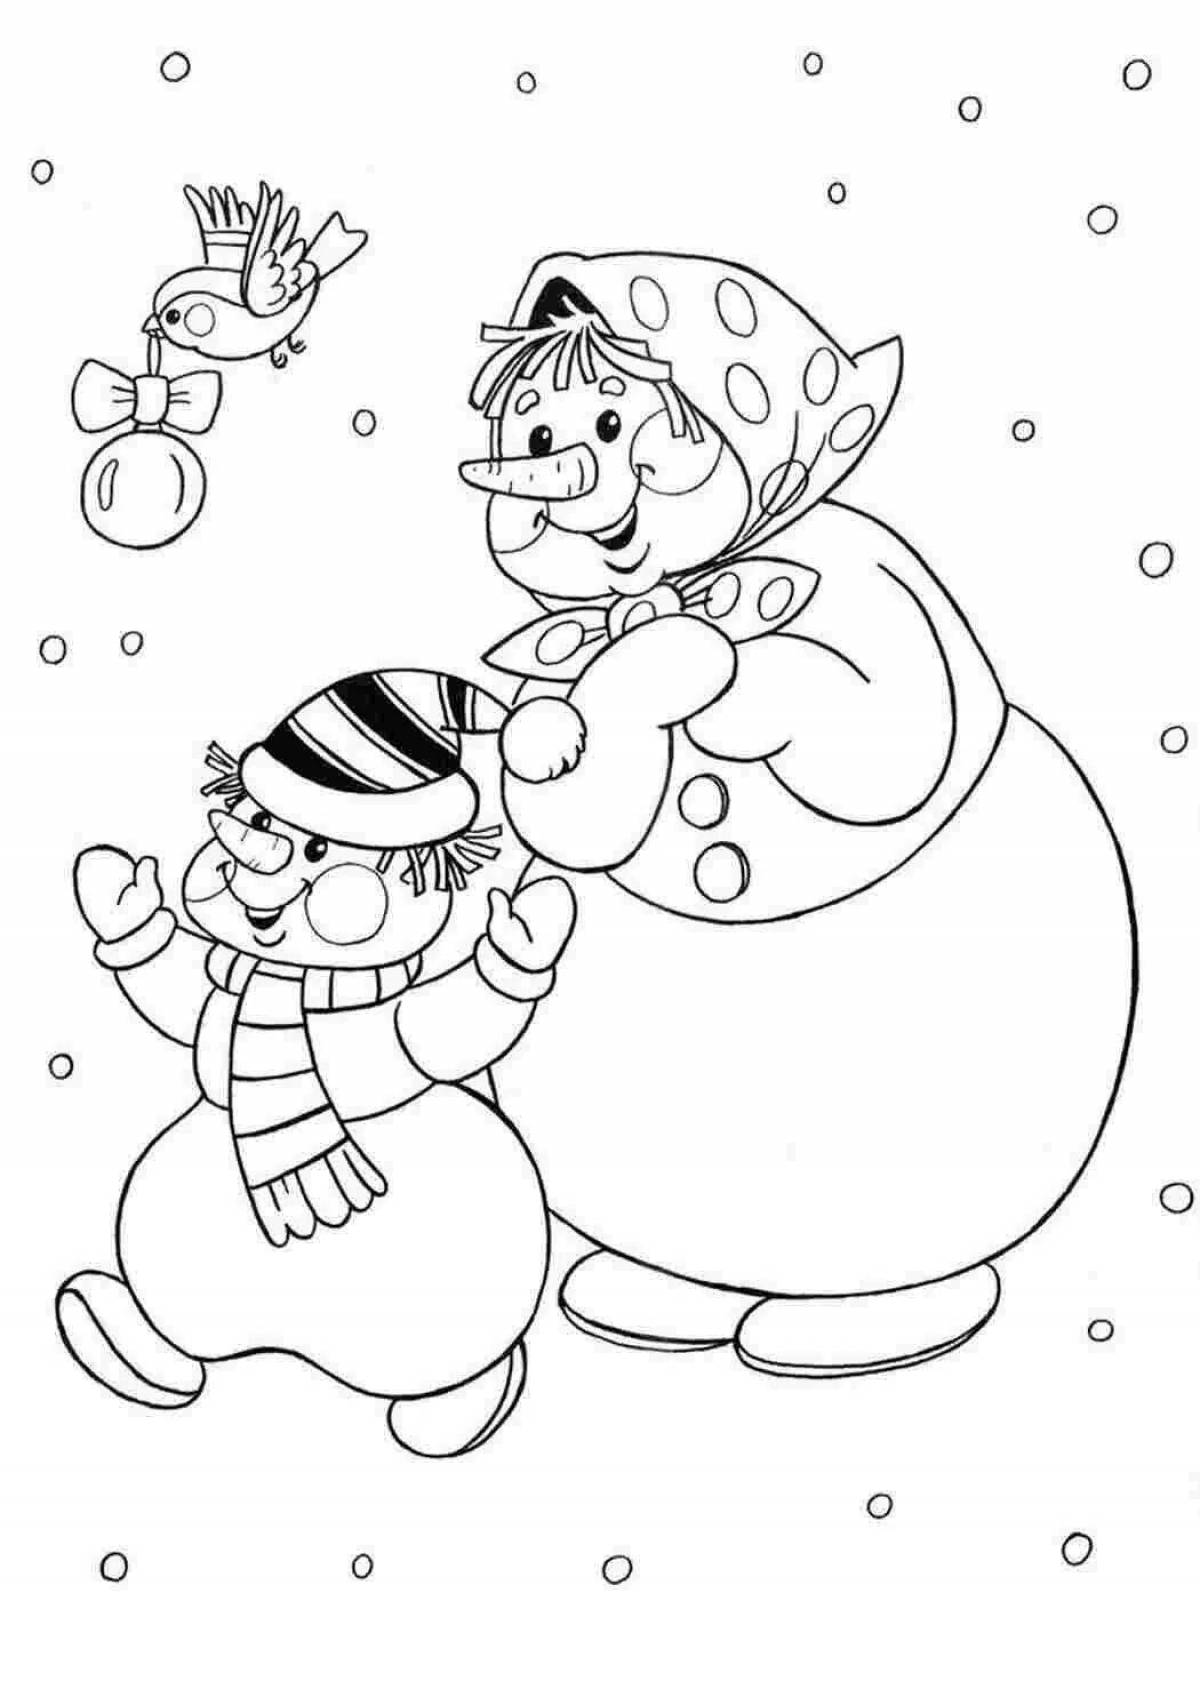 Coloring book sparkling snowman on a sled